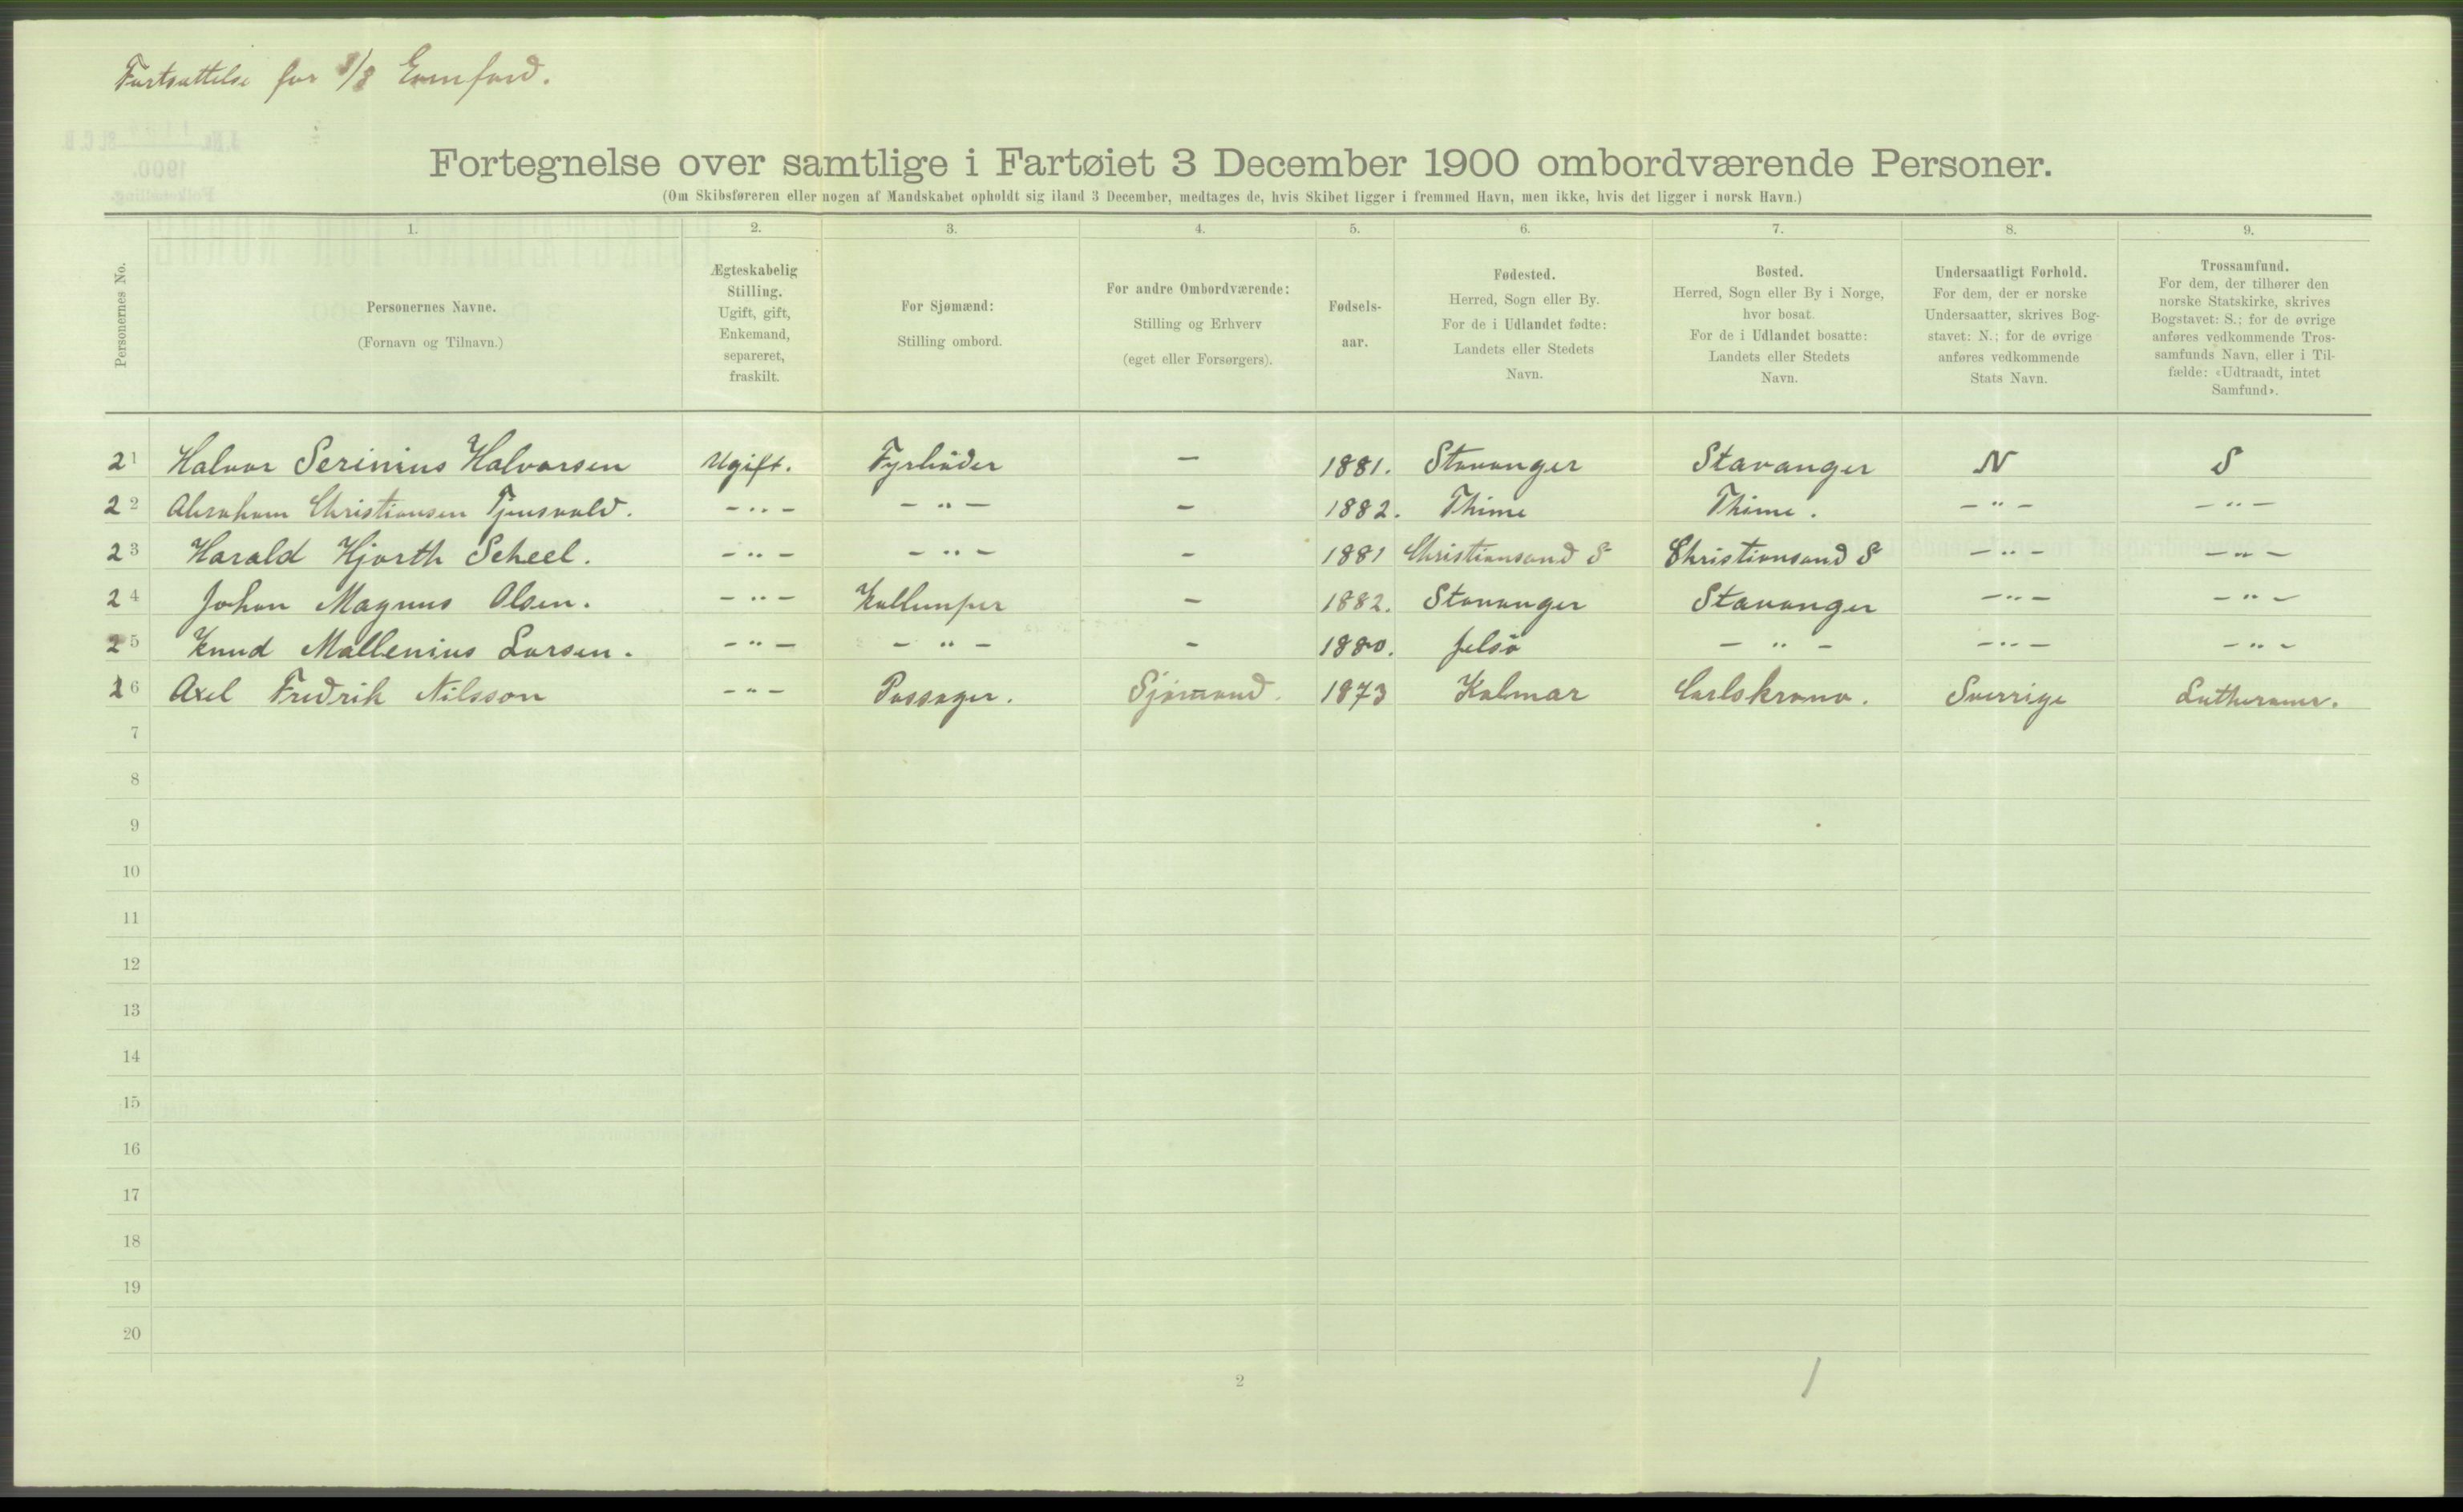 RA, 1900 Census - ship lists from ships in Norwegian harbours, harbours abroad and at sea, 1900, p. 5632